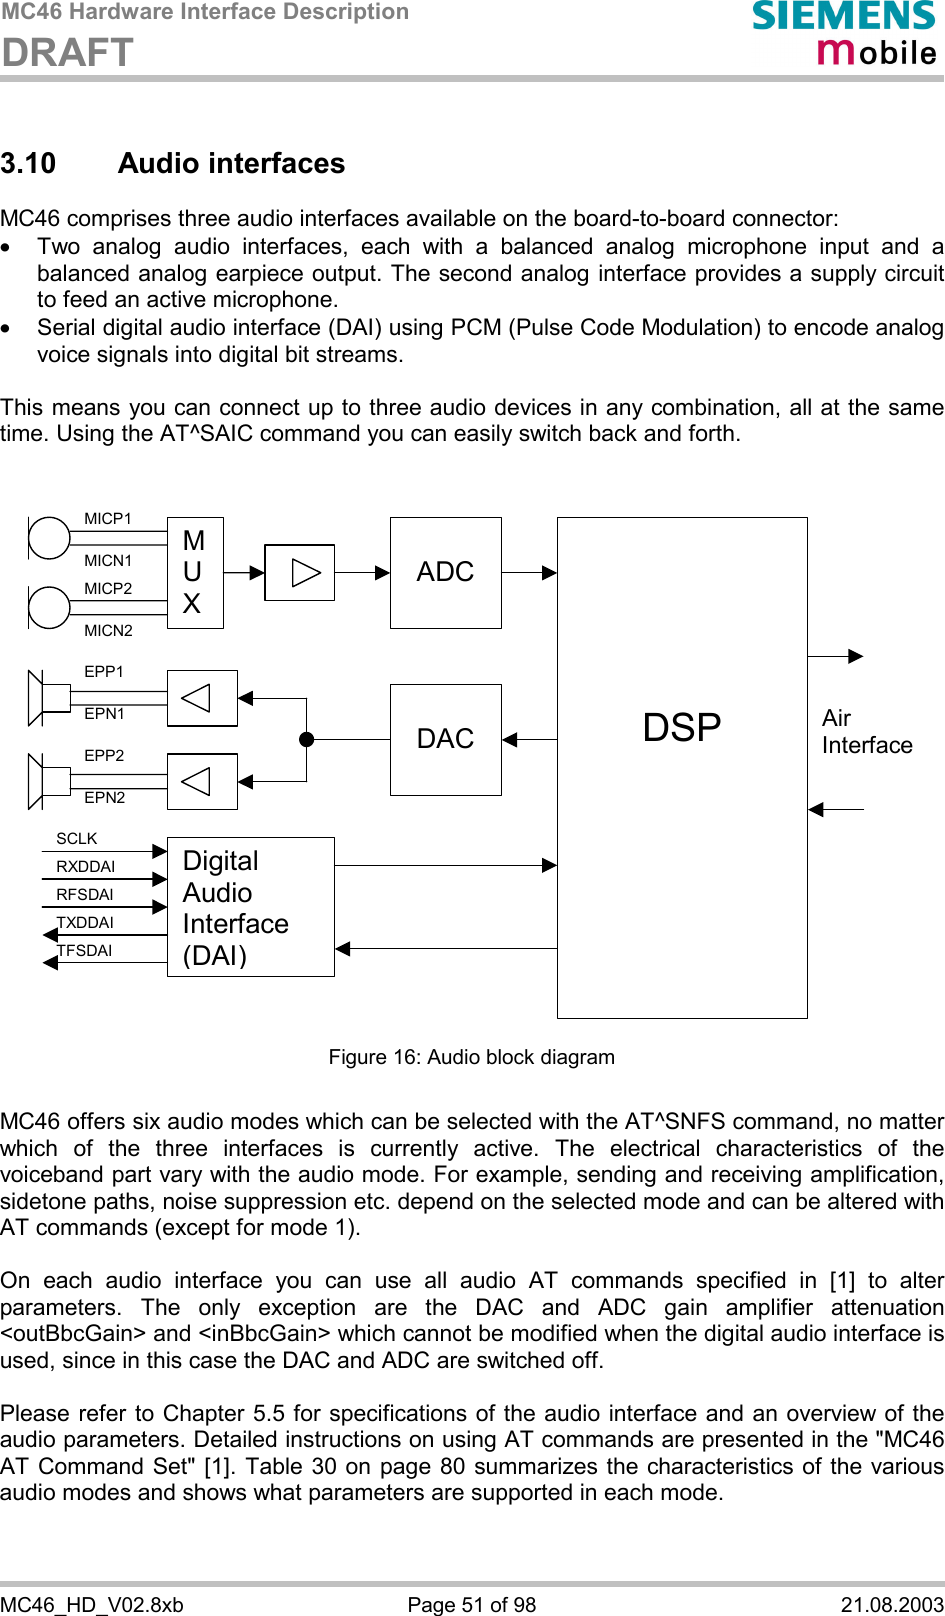 MC46 Hardware Interface Description DRAFT      MC46_HD_V02.8xb  Page 51 of 98  21.08.2003 3.10 Audio interfaces MC46 comprises three audio interfaces available on the board-to-board connector:  ·  Two analog audio interfaces, each with a balanced analog microphone input and a balanced analog earpiece output. The second analog interface provides a supply circuit to feed an active microphone. ·  Serial digital audio interface (DAI) using PCM (Pulse Code Modulation) to encode analog voice signals into digital bit streams.  This means you can connect up to three audio devices in any combination, all at the same time. Using the AT^SAIC command you can easily switch back and forth.    M U X  ADC    DSP  DACAir InterfaceDigital Audio Interface (DAI) MICP1 MICN1 MICP2 MICN2 EPP1 EPN1 EPP2 EPN2 SCLK RXDDAI TFSDAI RFSDAI TXDDAI  Figure 16: Audio block diagram  MC46 offers six audio modes which can be selected with the AT^SNFS command, no matter which of the three interfaces is currently active. The electrical characteristics of the voiceband part vary with the audio mode. For example, sending and receiving amplification, sidetone paths, noise suppression etc. depend on the selected mode and can be altered with AT commands (except for mode 1).  On each audio interface you can use all audio AT commands specified in [1] to alter parameters. The only exception are the DAC and ADC gain amplifier attenuation &lt;outBbcGain&gt; and &lt;inBbcGain&gt; which cannot be modified when the digital audio interface is used, since in this case the DAC and ADC are switched off.  Please refer to Chapter 5.5 for specifications of the audio interface and an overview of the audio parameters. Detailed instructions on using AT commands are presented in the &quot;MC46 AT Command Set&quot; [1]. Table 30 on page 80 summarizes the characteristics of the various audio modes and shows what parameters are supported in each mode.   